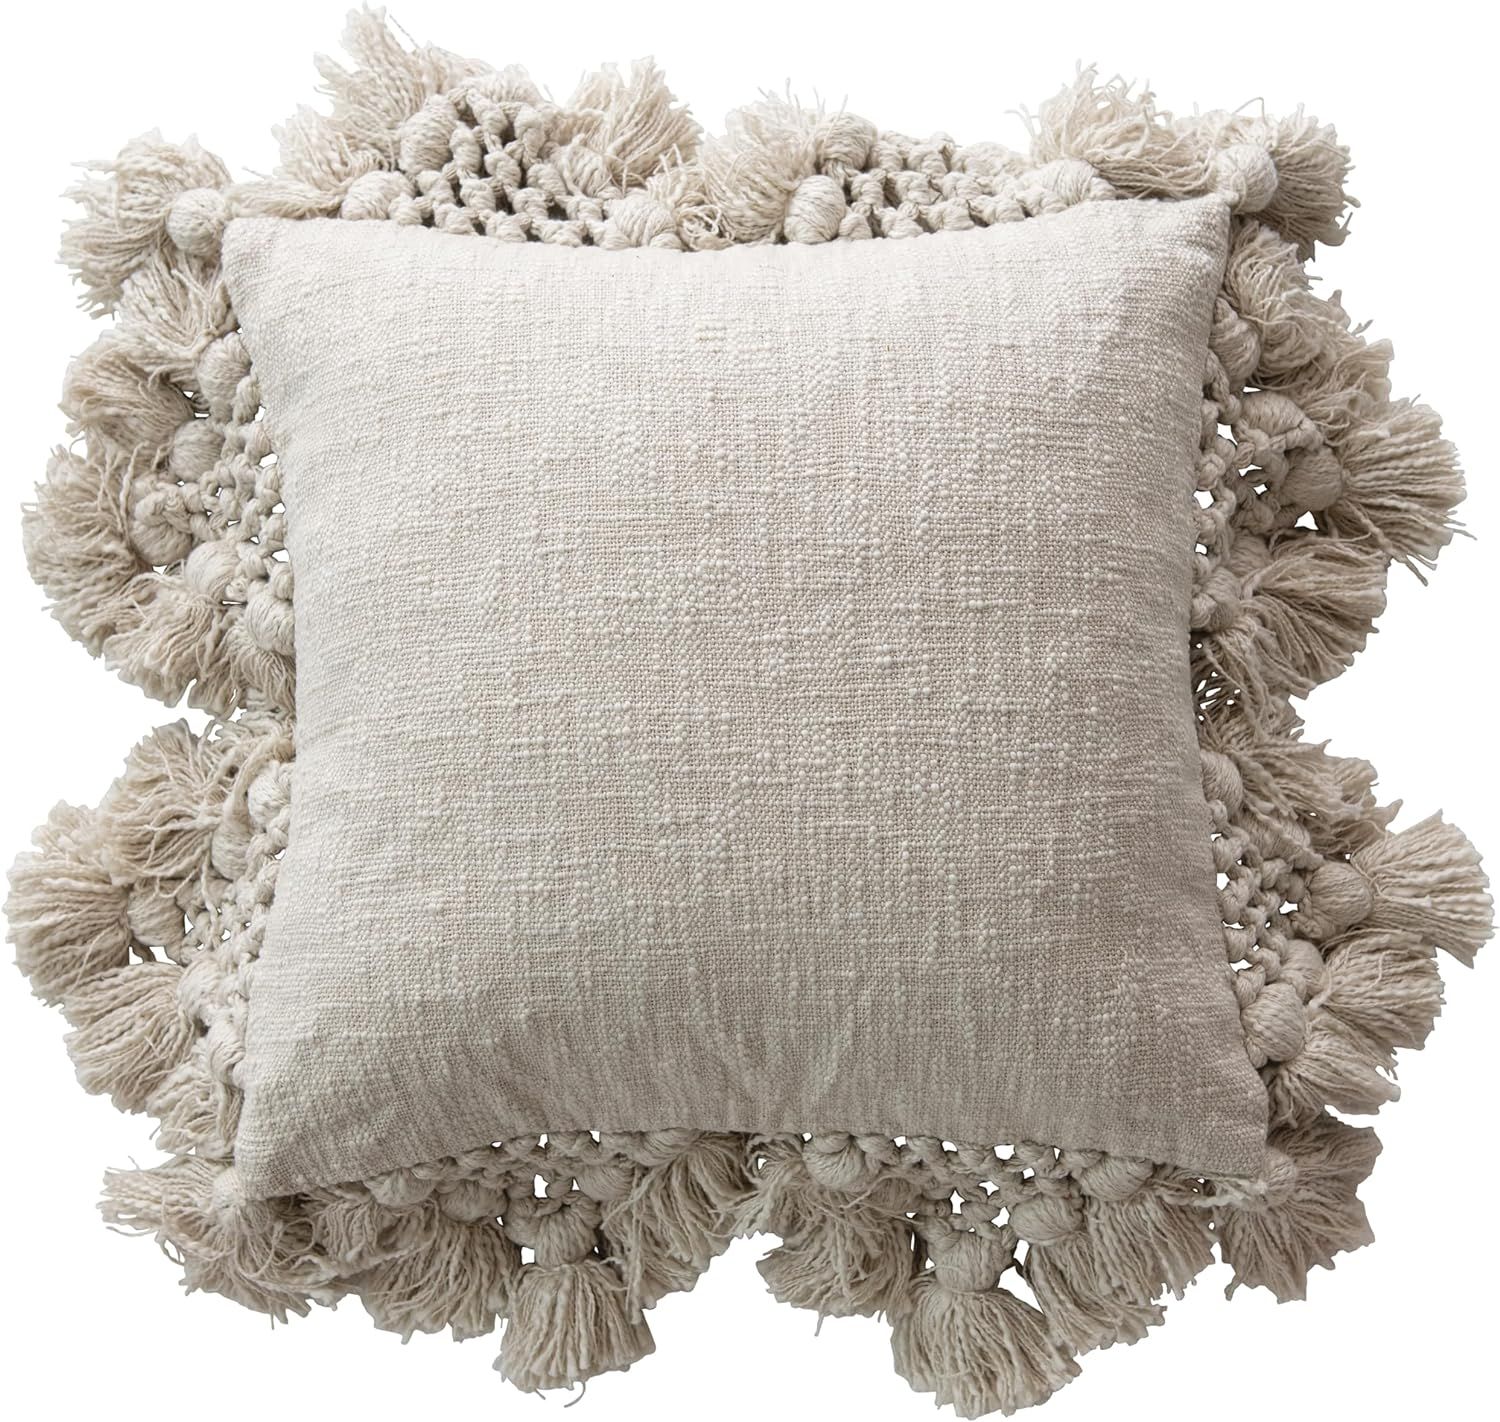 Creative Co-Op Cotton Slub Pillow with Crochet and Tassels, 1 Count (Pack of 1), Cream | Amazon (US)